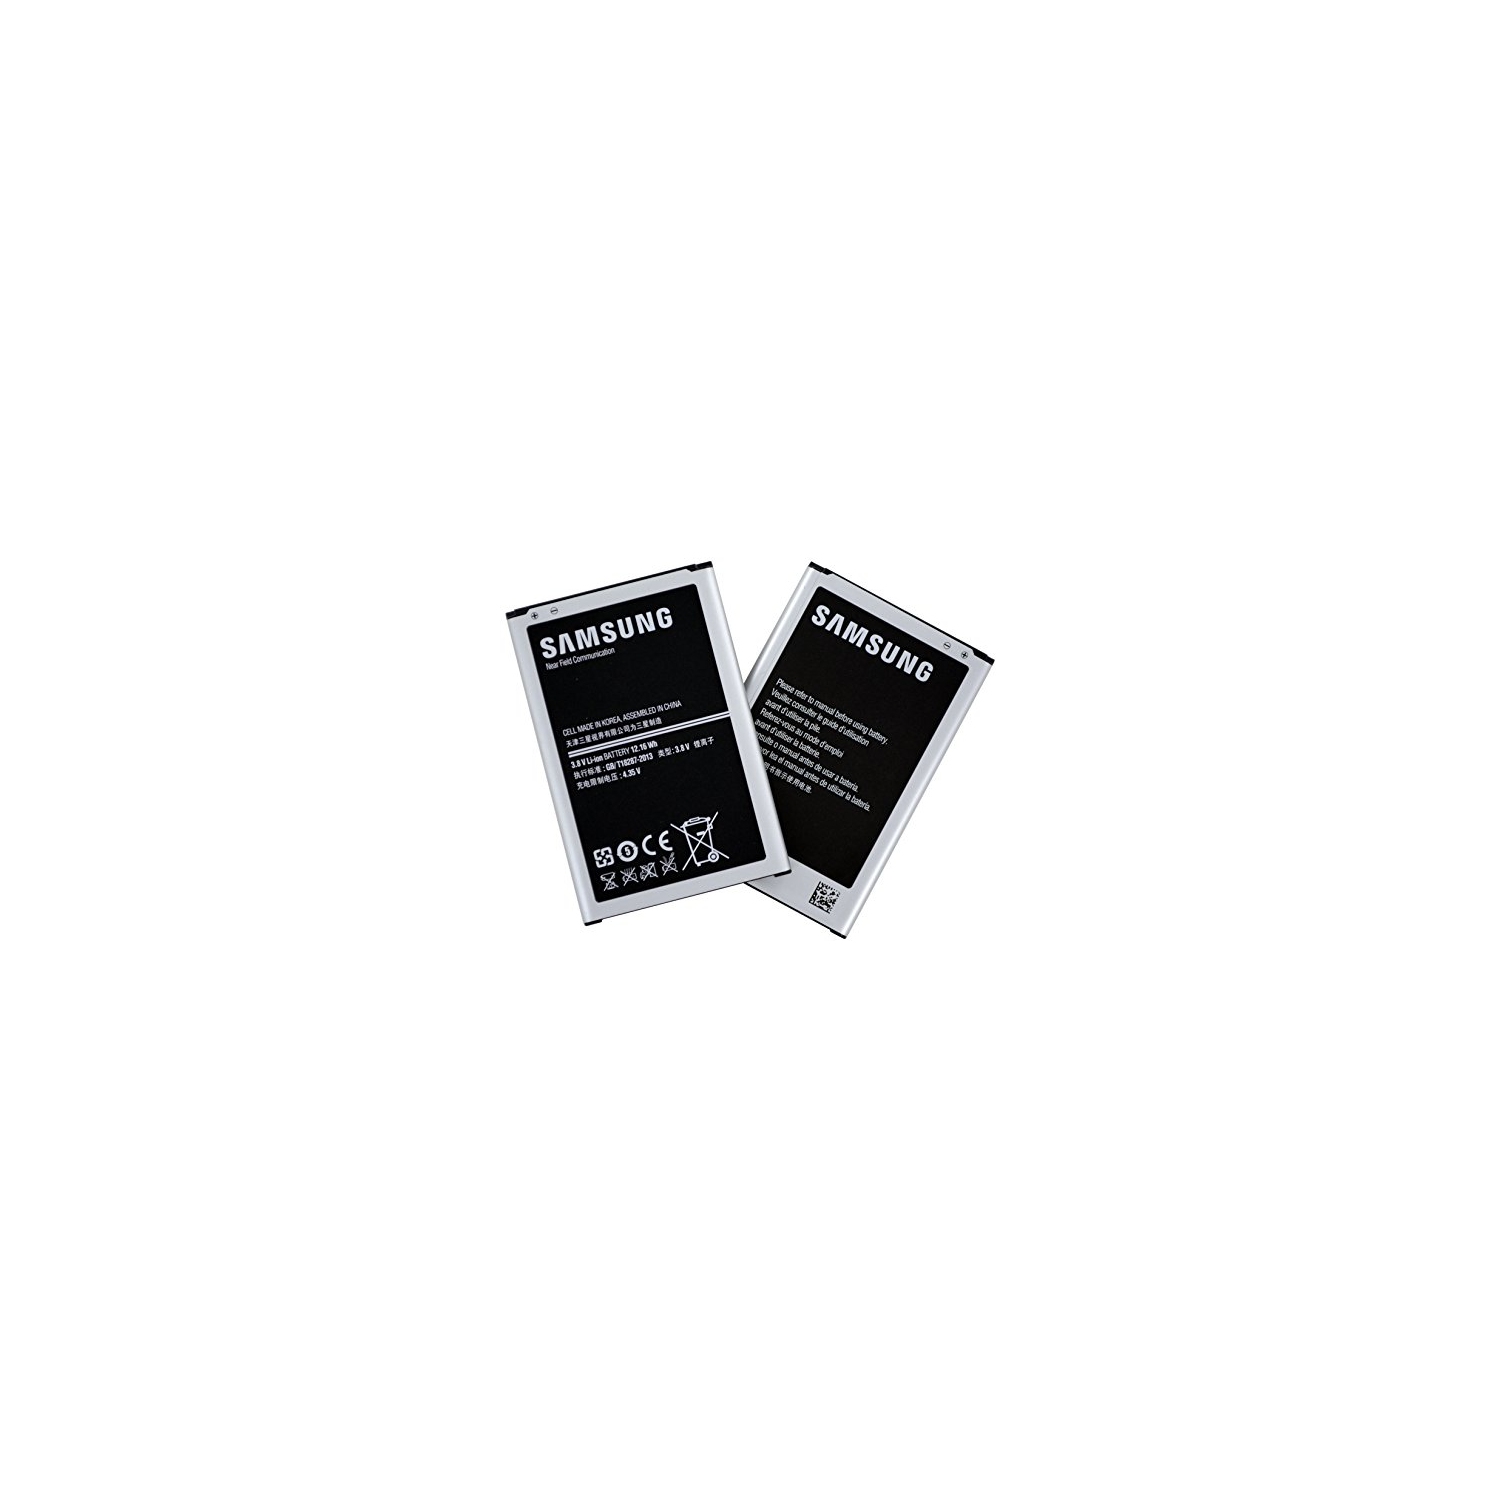 Samsung 3200mAh Standard Replacement Batteries for Galaxy Note 3, Pack of 2